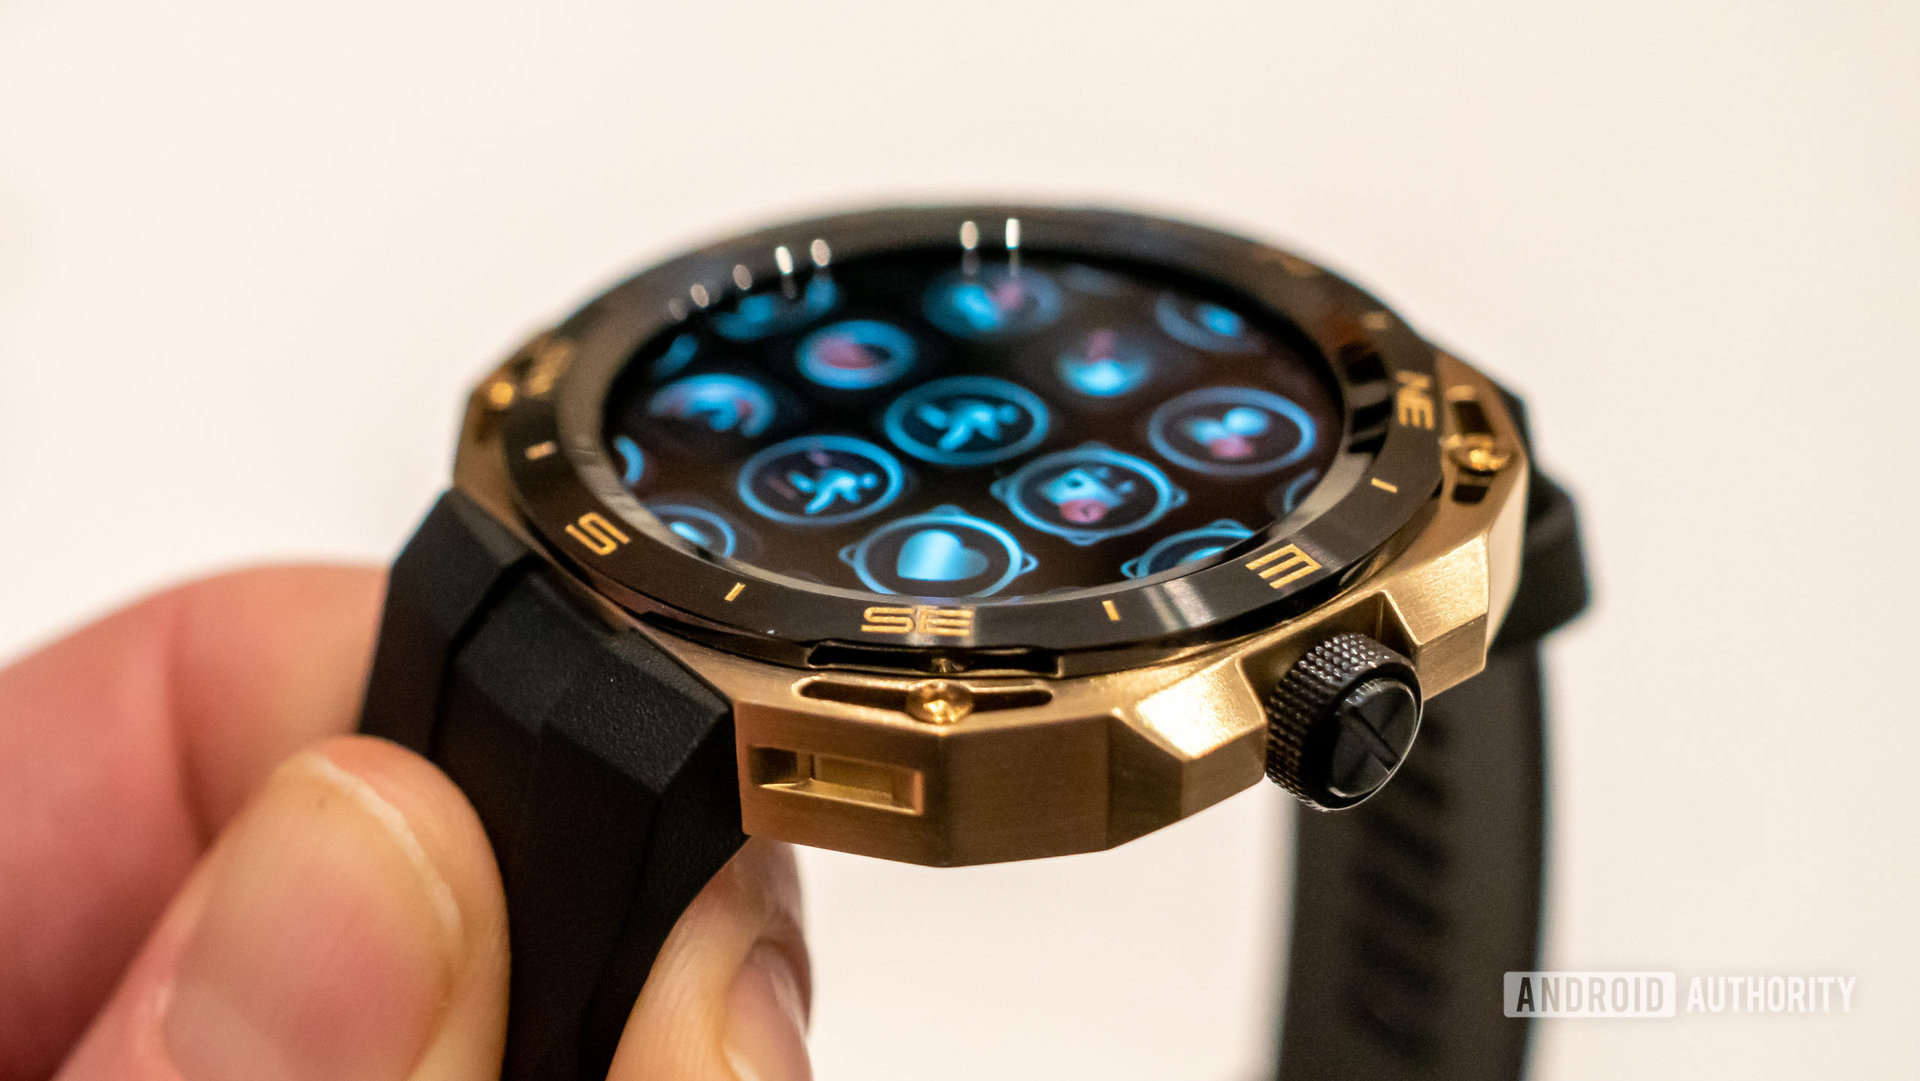 Huawei Watch GT Cyber gold black housing with apps on screen